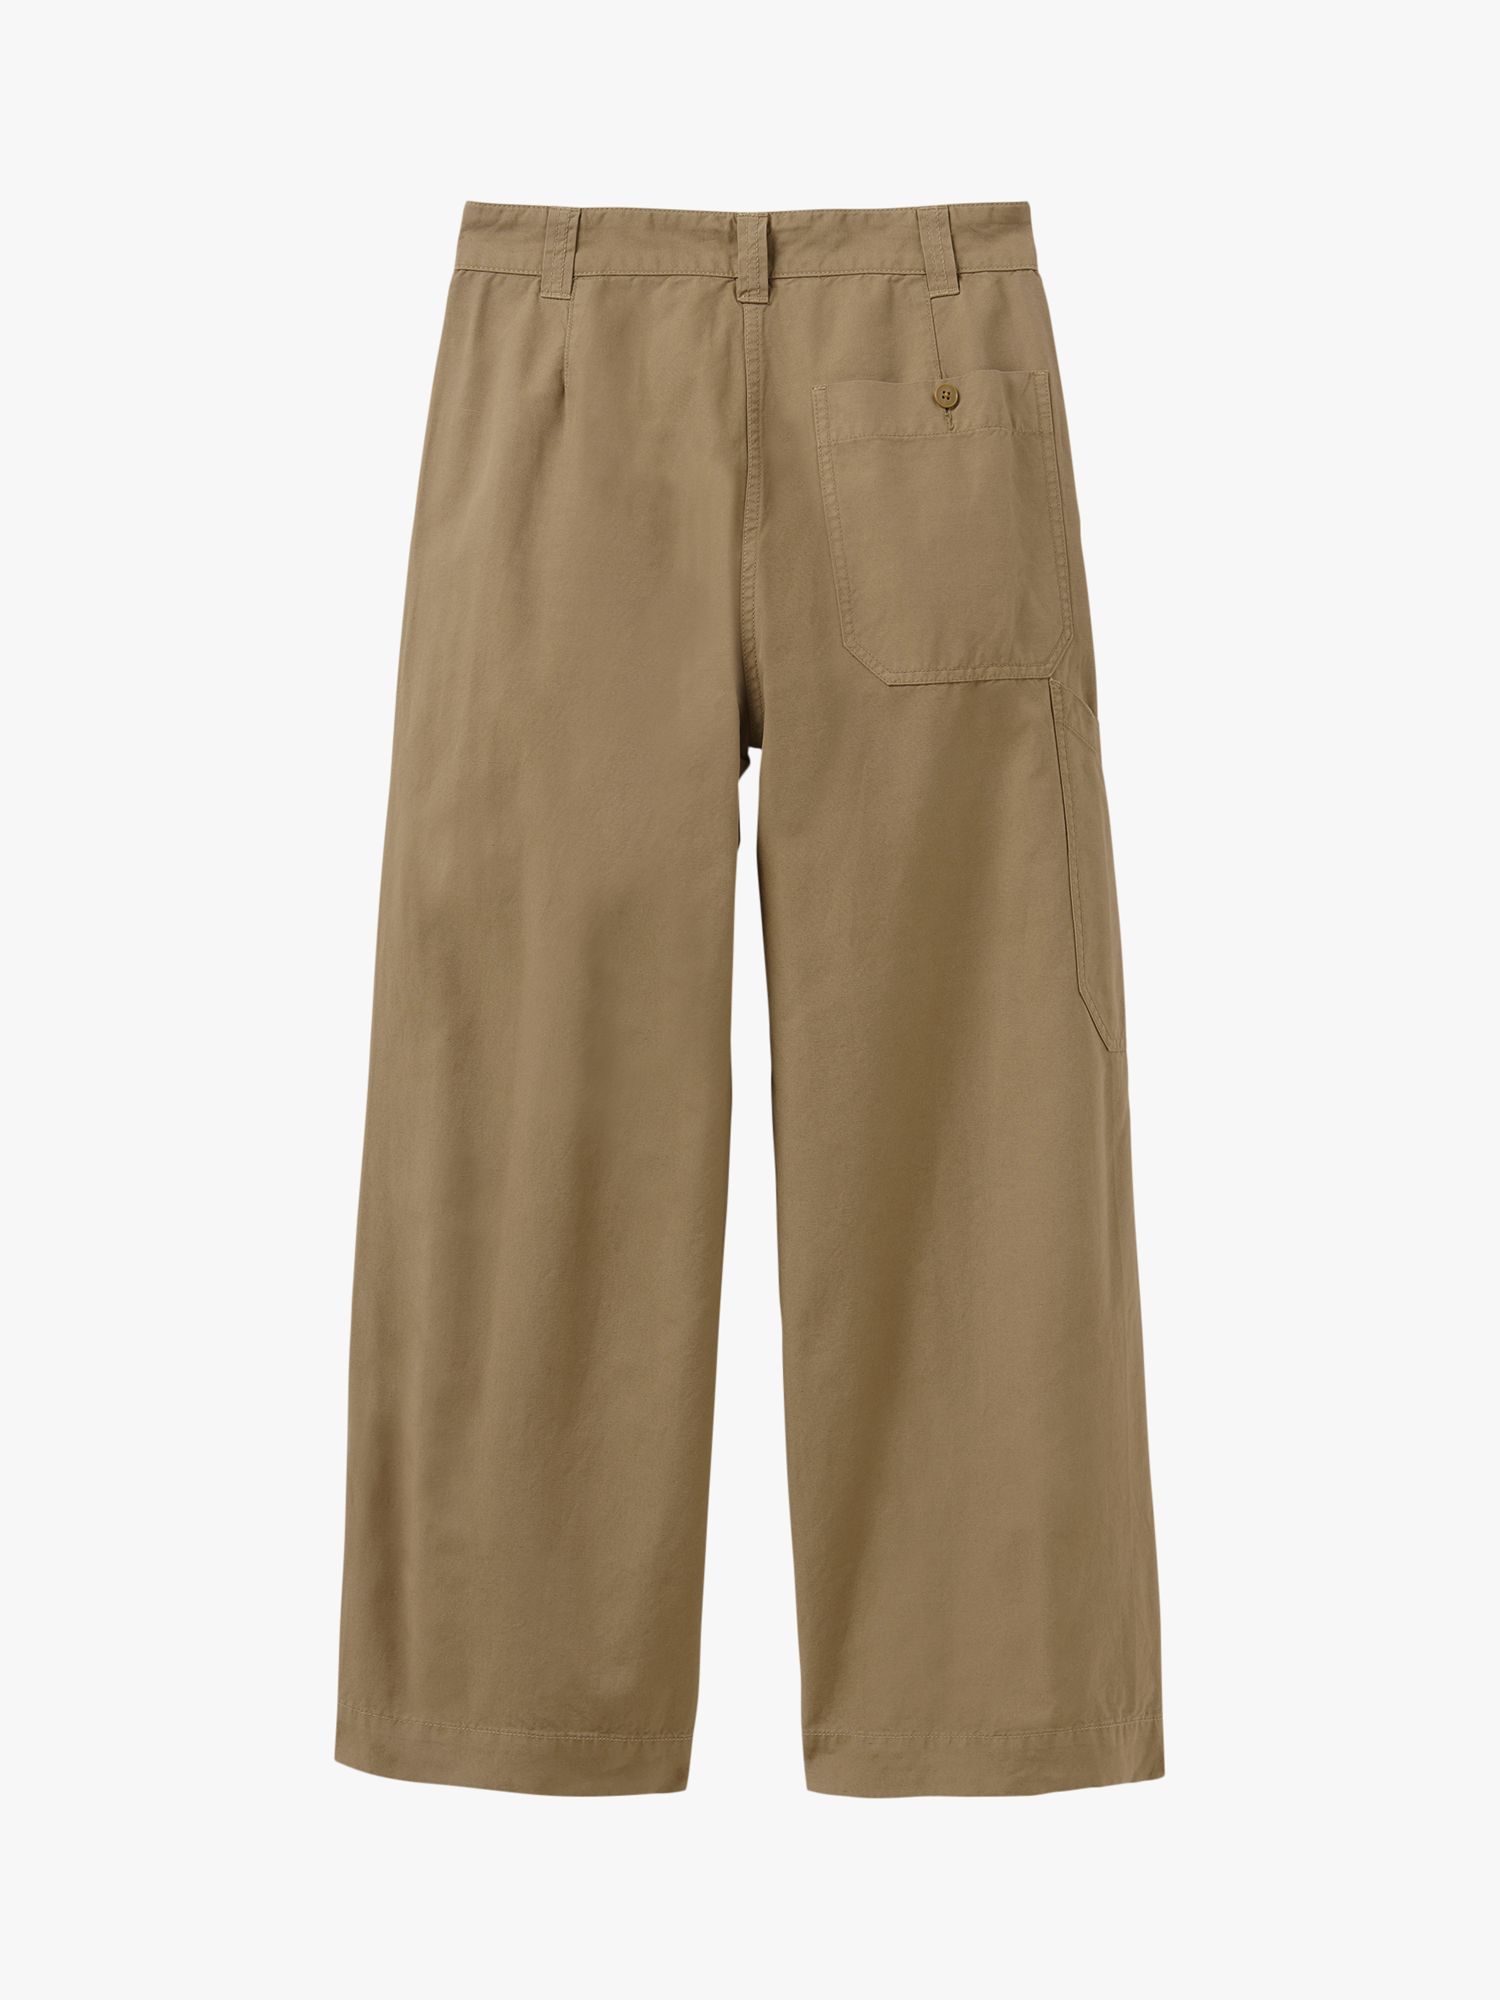 Toast Cotton Linen Canvas Trousers, Taupe at John Lewis & Partners